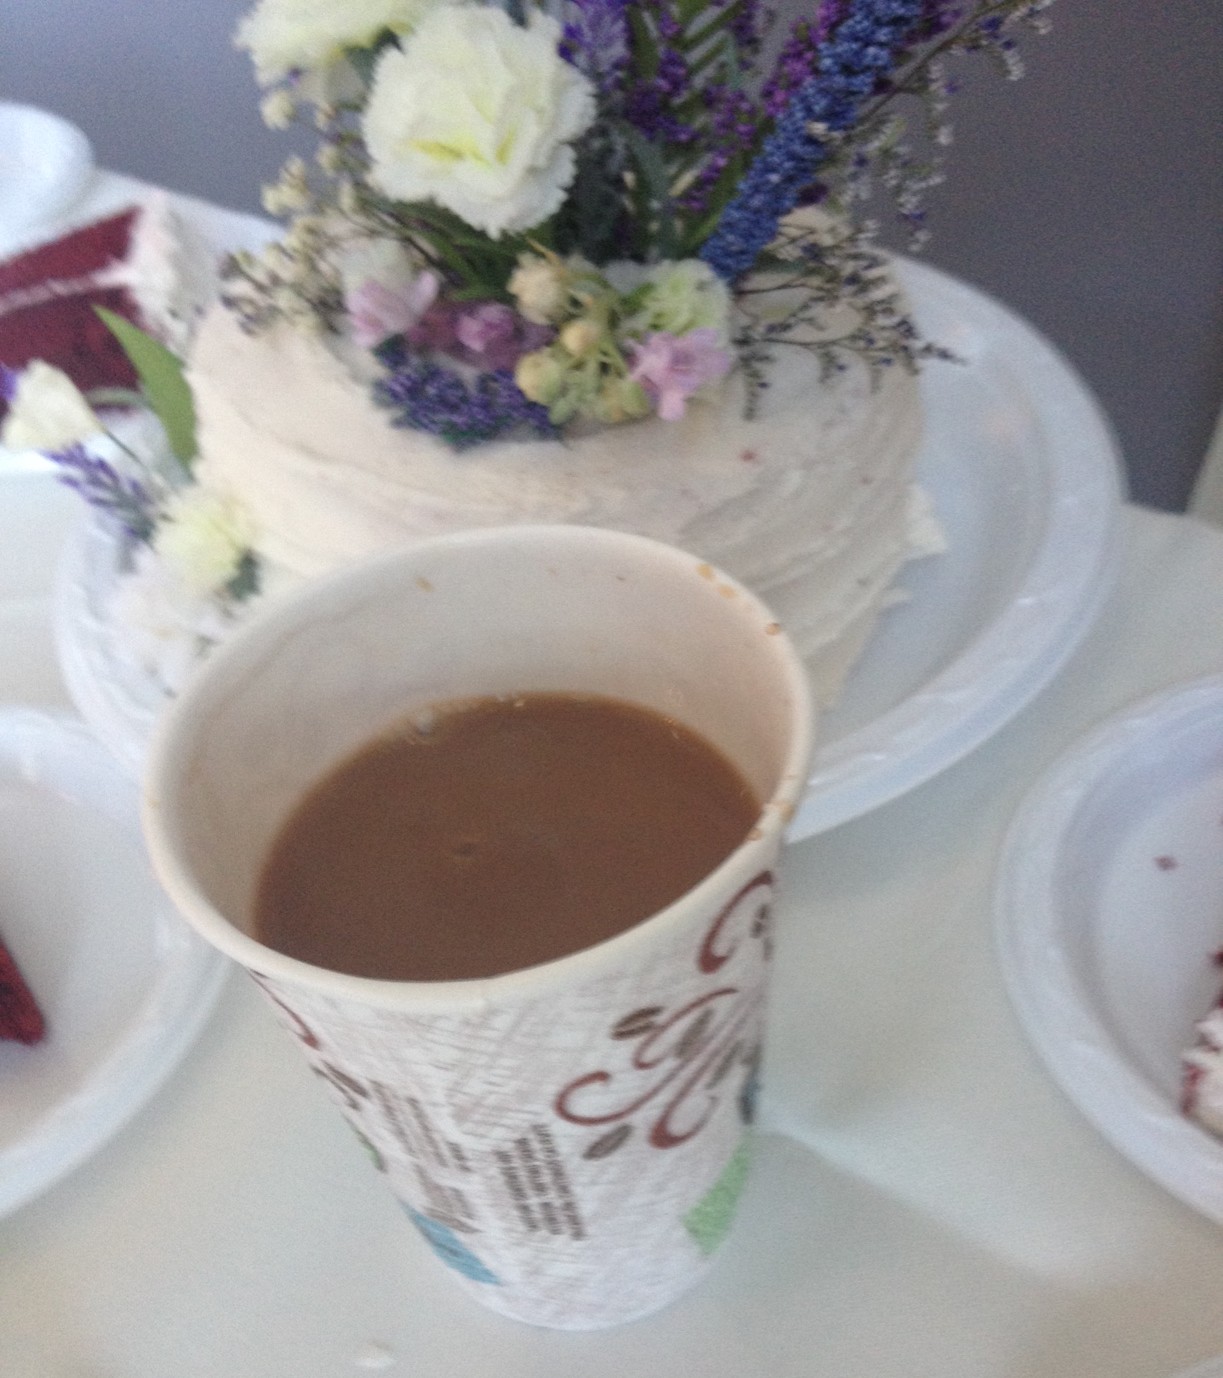 Photo showing a delicious cup of hot, decaf coffee at the wedding